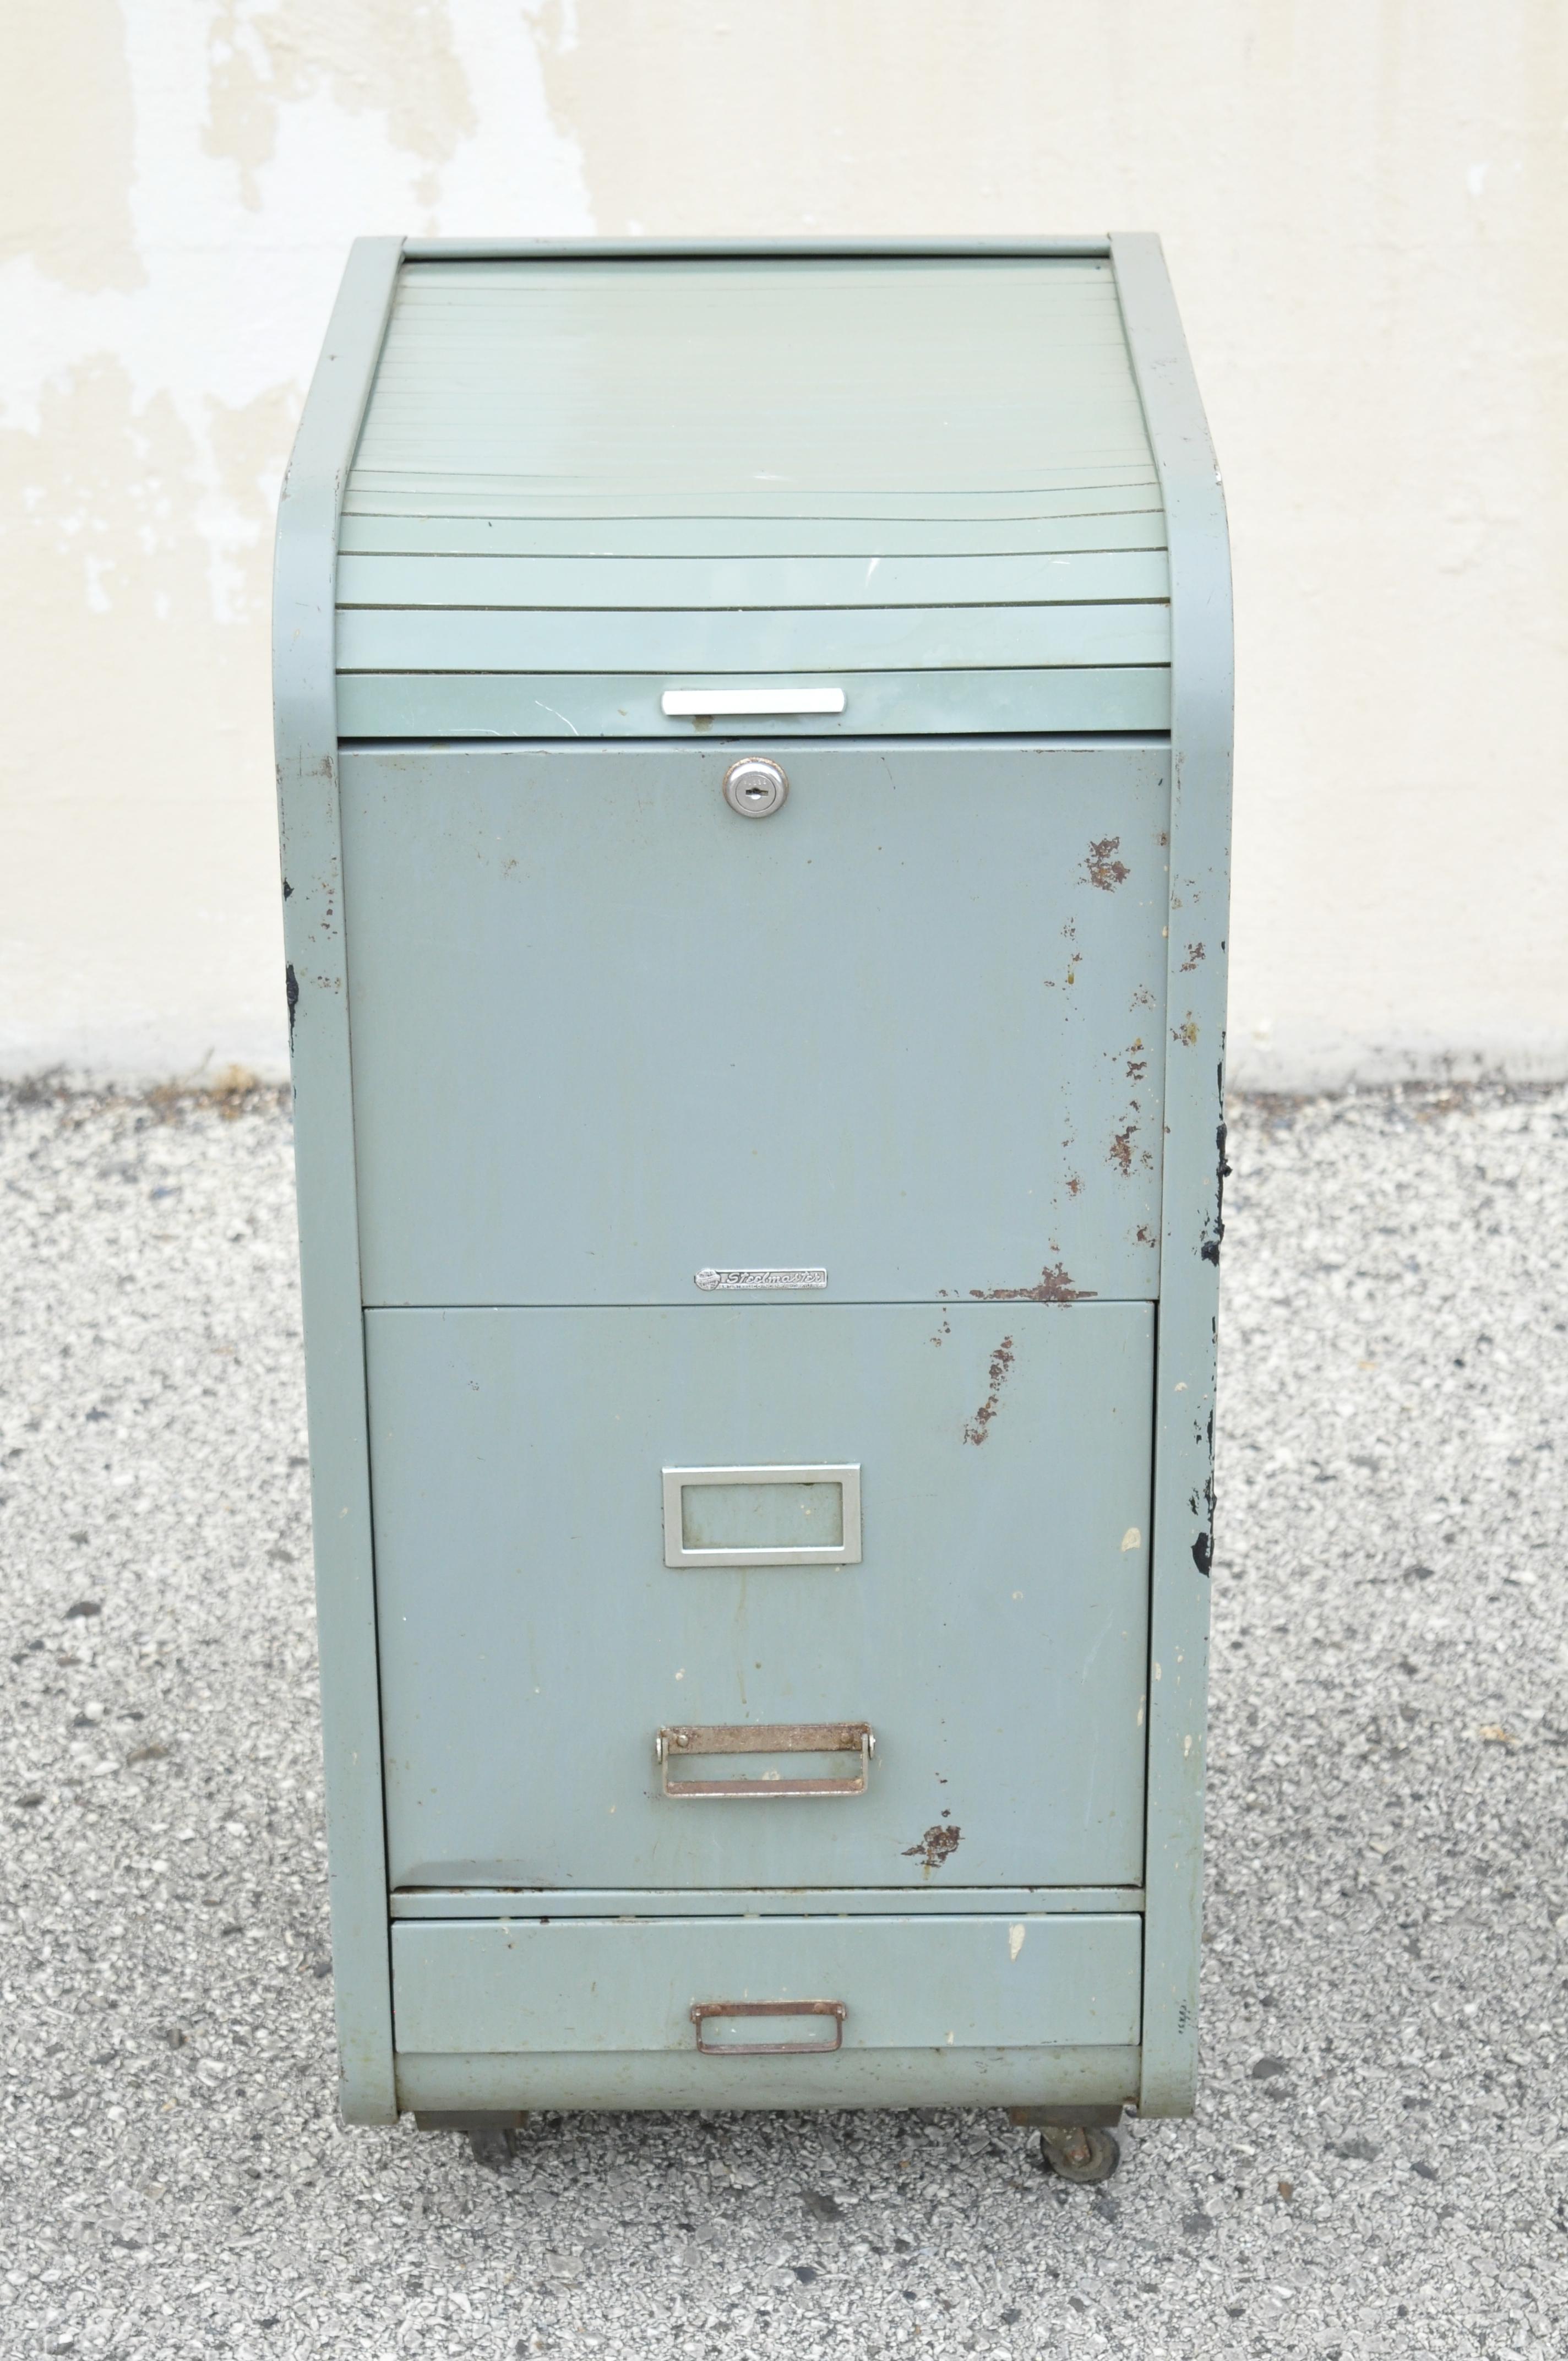 Vintage steelmaster steel metal roll top American Industrial steampunk office file cabinet. Item features roll top, 2 drawers, rolling casters, original green painted finish, original label, quality American craftsmanship, great style and form.